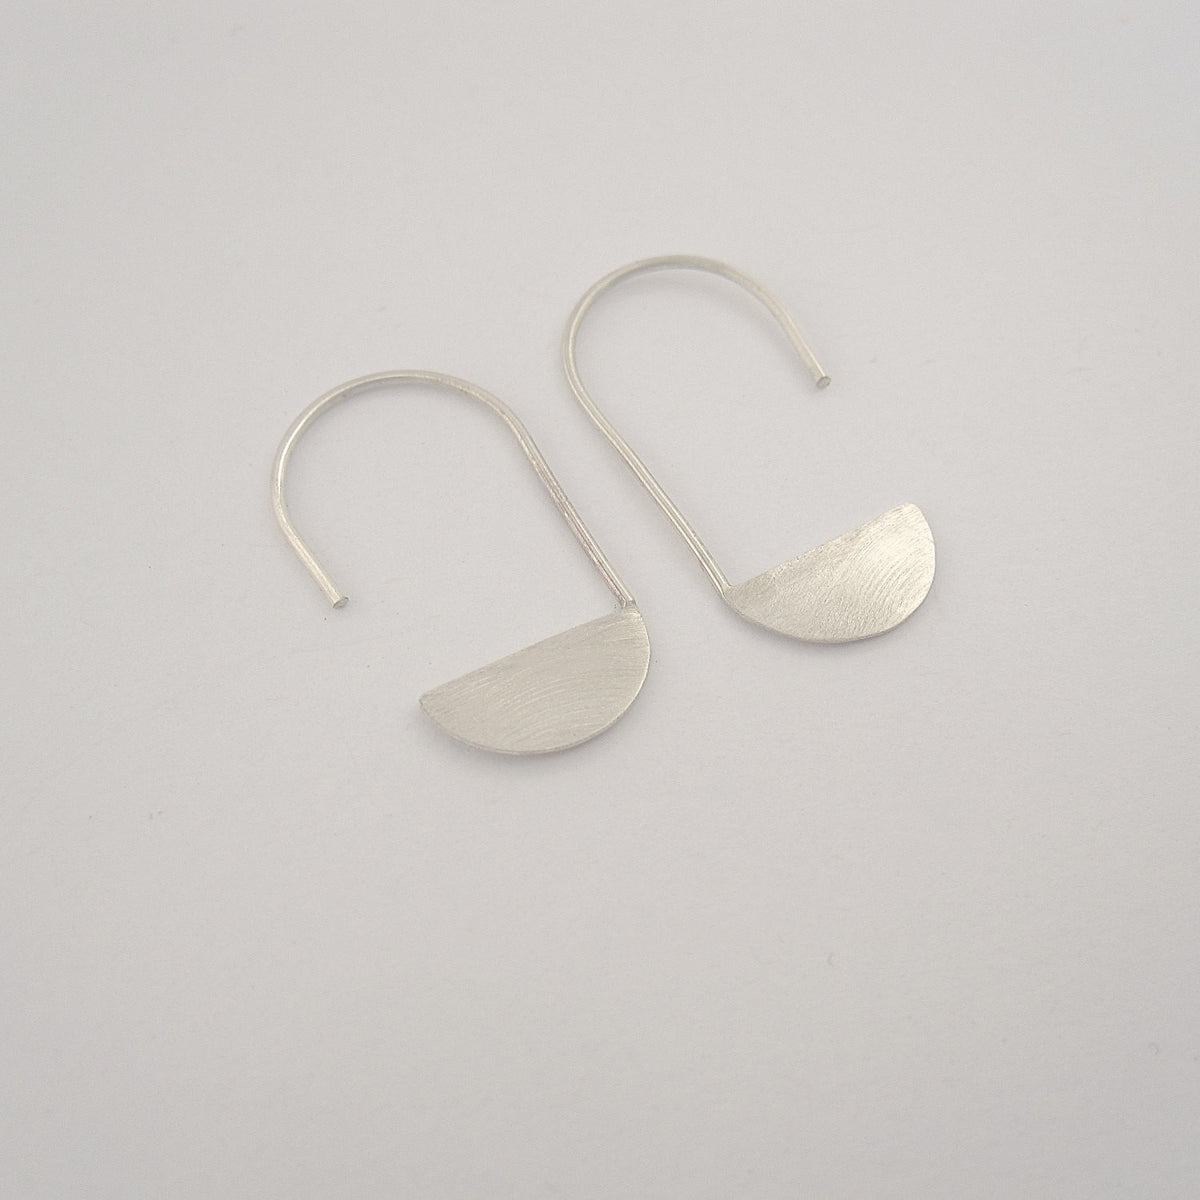 A Contemporary, Hand-Made Take on the Classic Design,  Crescent Moon Dangle Earrings - 0136 - Virginia Wynne Designs